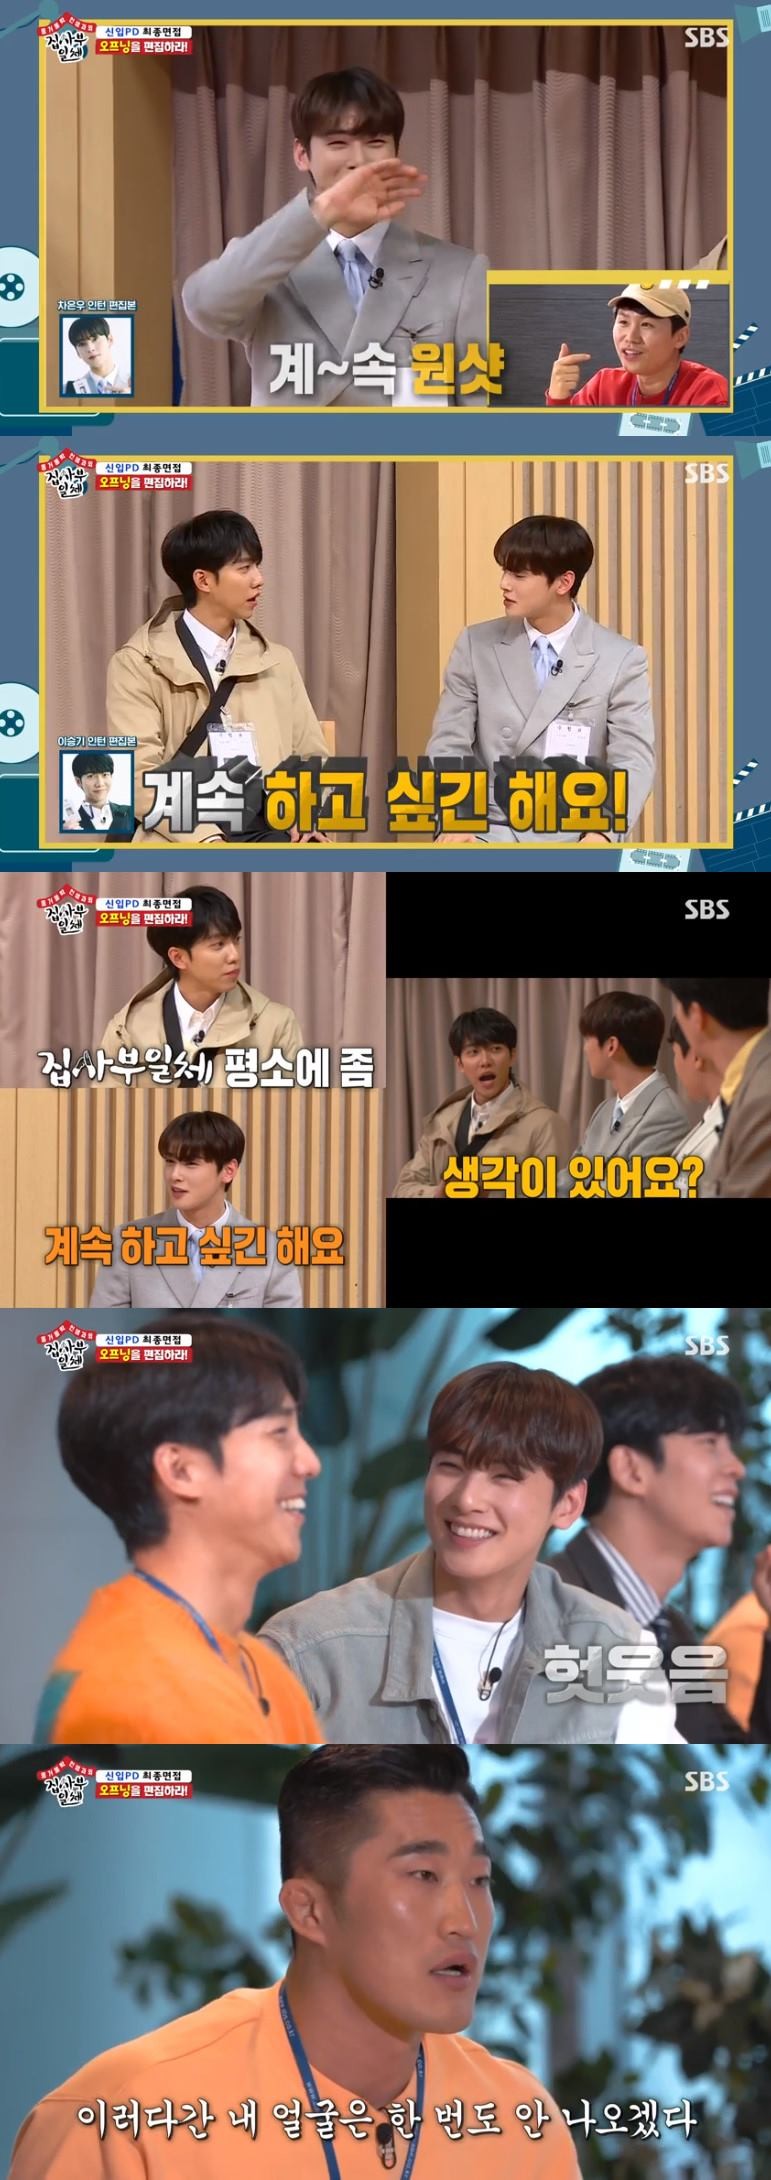 All The Butlers Cha Eun-woo and Lee Seung-gi were hired as PDs after SBS Announcer.On SBS All The Butlers broadcast on the 26th, last week, Cha Eun-woo and Kim Dong-Hyun were shown a broadcasting station experience.First, the SBS 8 News challenge was released, especially Cha Eun-woo and Lee Seung-gi, who played the role of a daily Announcer ahead of the live broadcast.They practiced in practice.Cha Eun-woo took on 8 News radio AnnouncerCha Eun-woo was even more nervous because of reports about Donald Ivana Trump, who had to report after the end of the word.Fortunately, Cha Eun-woo has gone through the troubles well, and has since progressed without clogging, especially with difficult words, and has shown off his remarkable ability with calm voice and pronunciation.Lee Seung-gi played as a sports announcer as it appeared on 8 News on March 30; Lee Seung-gi was worried about making many mistakes due to tension during practice.However, he showed a professional appearance on the air, and after the broadcast he was praised by anchors.The final interviewer for the members entertainment PD was released.Choi Young-in, general manager of the SBS Entertainment Awards ceremony last year, Park Sung-hoon CP and Kwak Seung-young CP, together as judges.First, the results of the first final mission Editing were released; the members had four hours of editing before; for the first time, an edited version of Cha Eun-woo was released.His video was Cha Eun-woo direct cam. Kwak Seung-young CP praised the theme is excellent and laughed.Lee Seung-gi showed amazing editing skills by using various cuts, but he laughed at the Devils Editing.By editing what he and Cha Eun-woo said, Cha Eun-woo led to the answer that he wanted to fix All The Butlers.Kim Dong-Hyun also added a laugh, editing only to stand out like Cha Eun-woo.The second final mission was Submission. Each of them was to invite Master All The Butlers as an intern PD. The first person to step out was Shin Sung-rok.He called Han Ji-min, who looked like a furious relationship.Han Ji-min couldnt stop laughing at Shin Sung-roks passionate posture; Shin Sung-rok was praised for his persuasiveness.Cha Eun-woo contacted You Hee-yeol, who was delighted to receive Cha Eun-woos call but changed after completing the situation.Especially when Cha Eun-woo actively said, Where are you now?, You Hee-yeol laughed, saying, Is this friend more than I look at?But Cha Eun-woo appeared convincing, explaining the reasons he called, and he, too, was praised.Yang Se-hyeong called Baek Jong-won, who was on the air.Baek Jong-won was embarrassed to say, I am a master, but he showed his mind to persuade Yang Se-hyeong.He replied, I will try to think about it because it is a good idea. He also invited members to his house.Kim Dong-Hyun called Ma Dong-Seok, who was unable to stop the tension but explained why he wanted to be a master.This led to the success of getting Ma Dong-Seoks promise to appear; Lee Seung-gi contacted Bong Joon-ho.Unfortunately, the phone was off, and Lee Seung-gi left a voice message: his excellent speech skills were admirable.Finally, the final results were announced: Mr. Lee Seung-gi is too seasoned, and Mr. Cha Eun-woo has grown greatly in a short period of time, said Choe Yeong, general manager.Cha Eun-woo then said he hired as a new PD and Lee Seung-gi as a career PD, respectively; Cha Eun-woo and Lee Seung-gi shared their joy together.